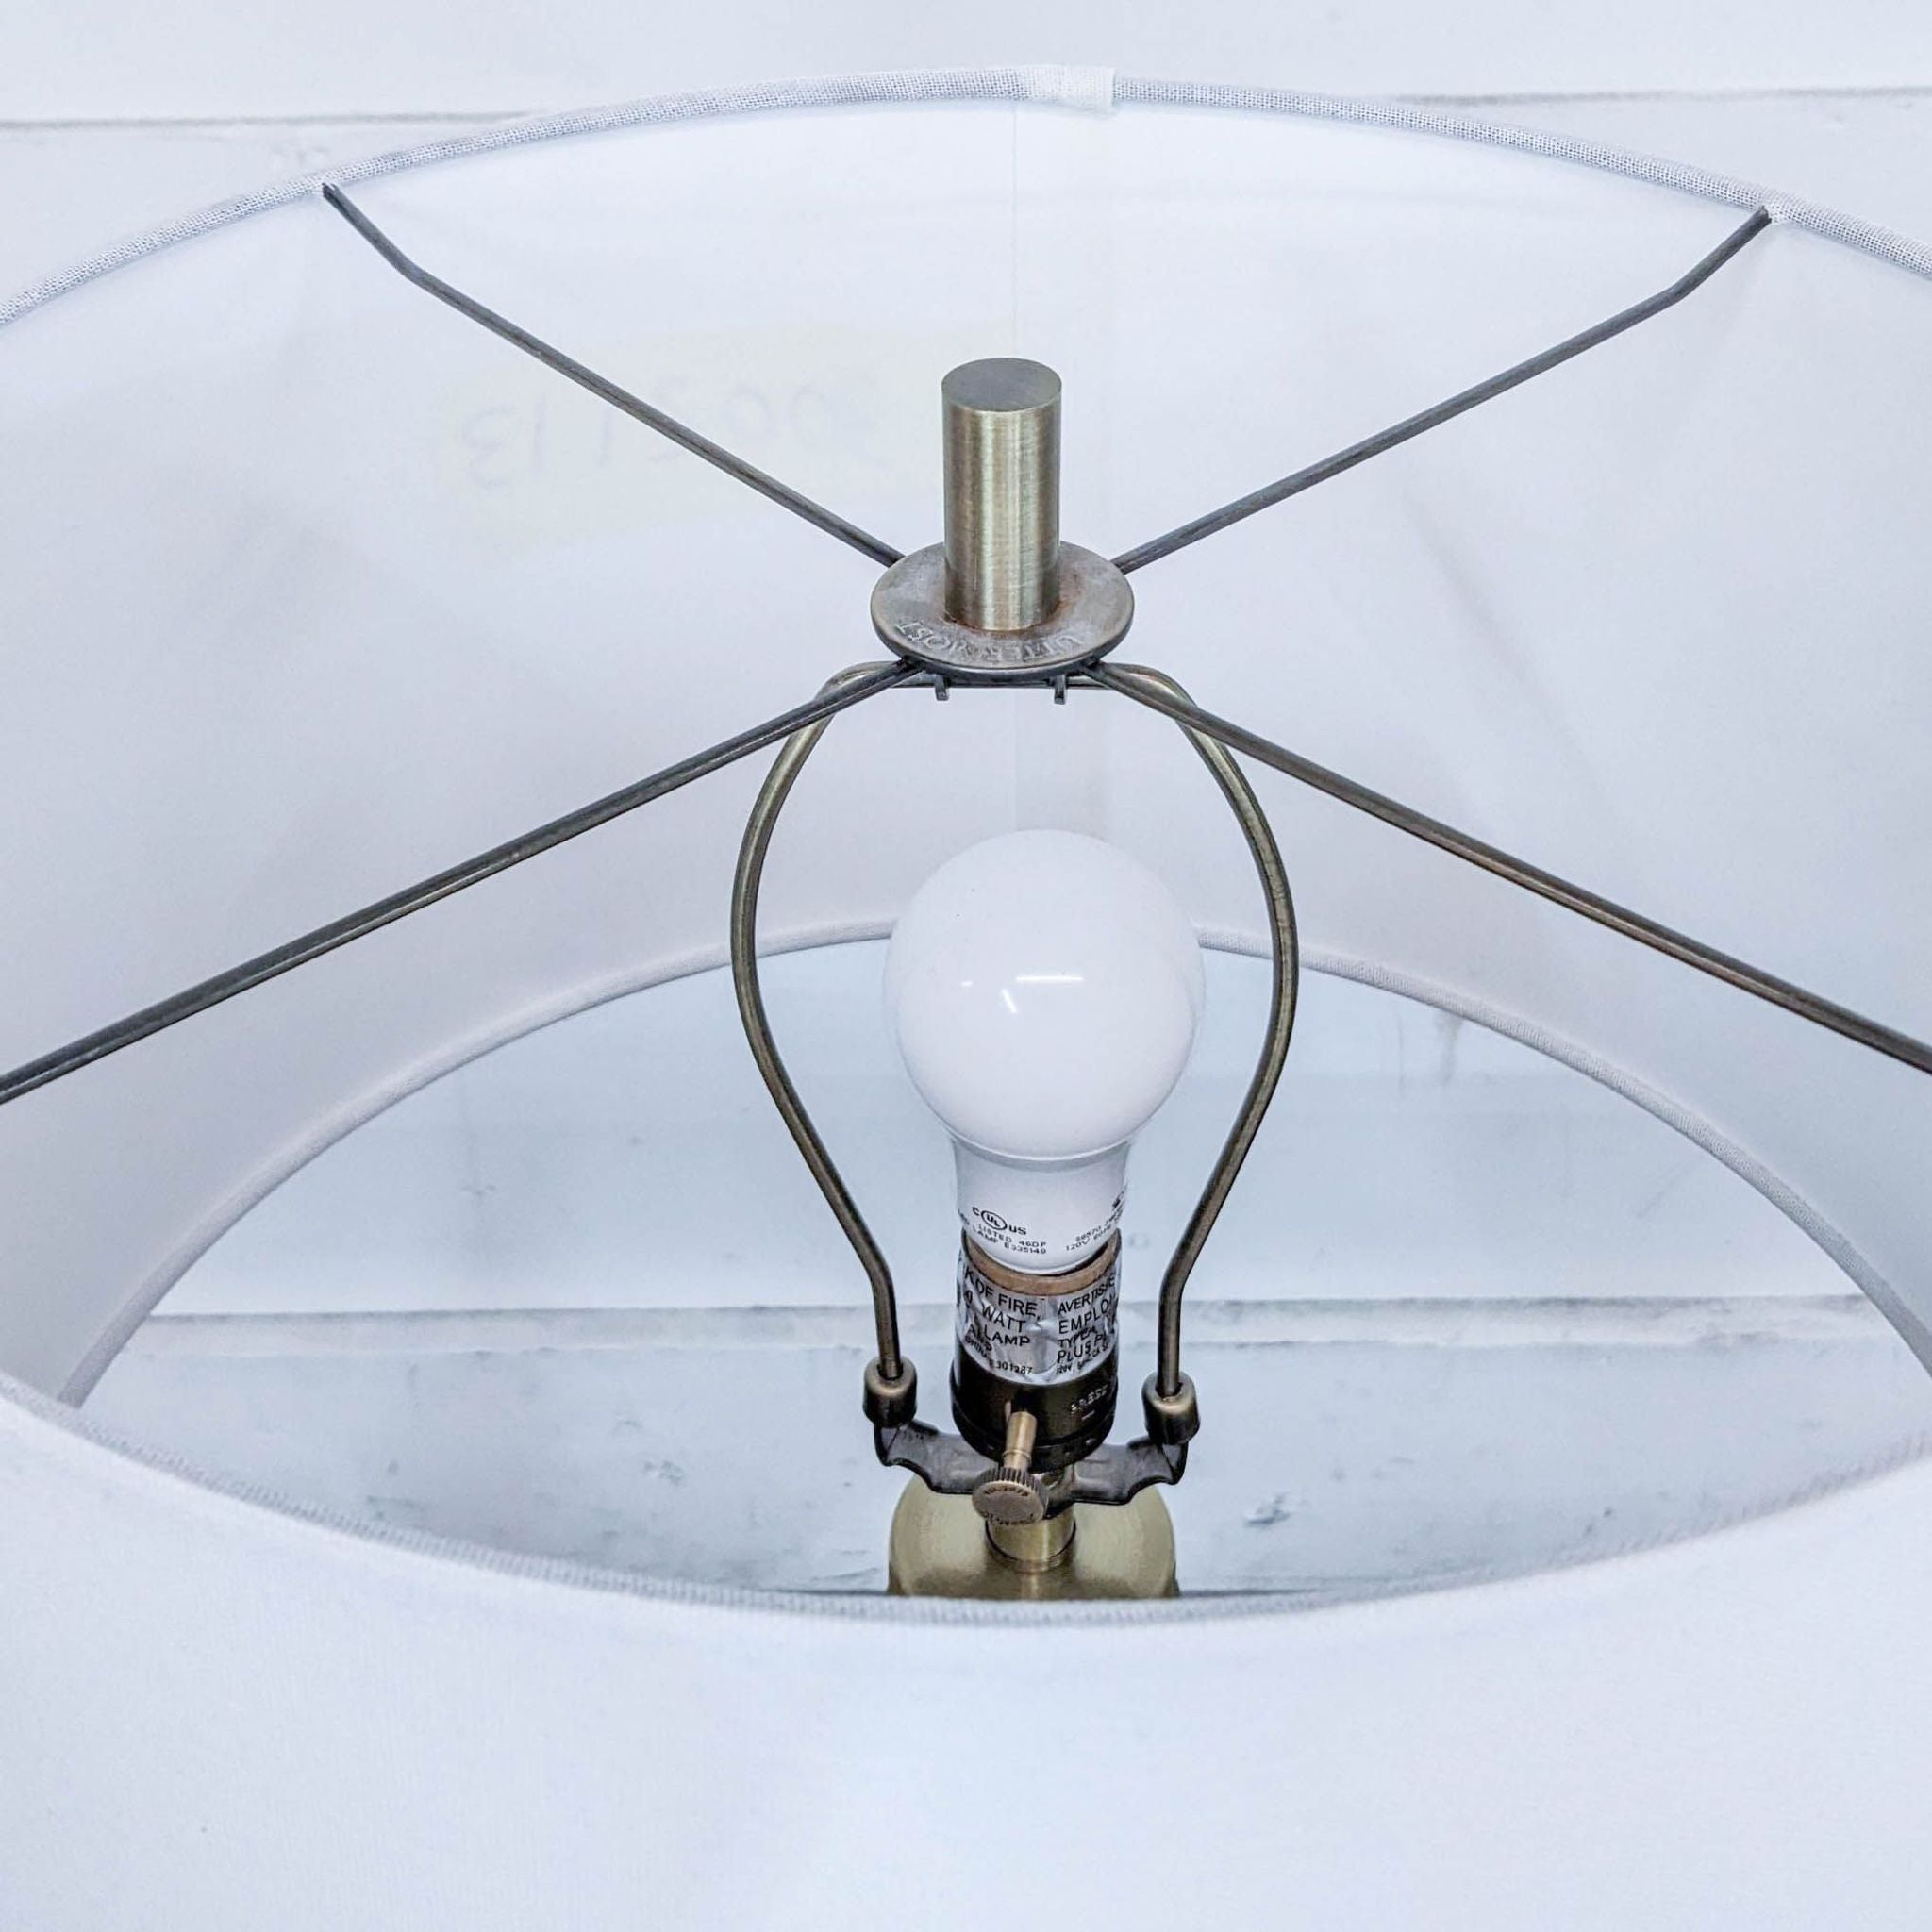 Top view of a Reperch lamp showing white shade, bulb, and brass accents on a light background.